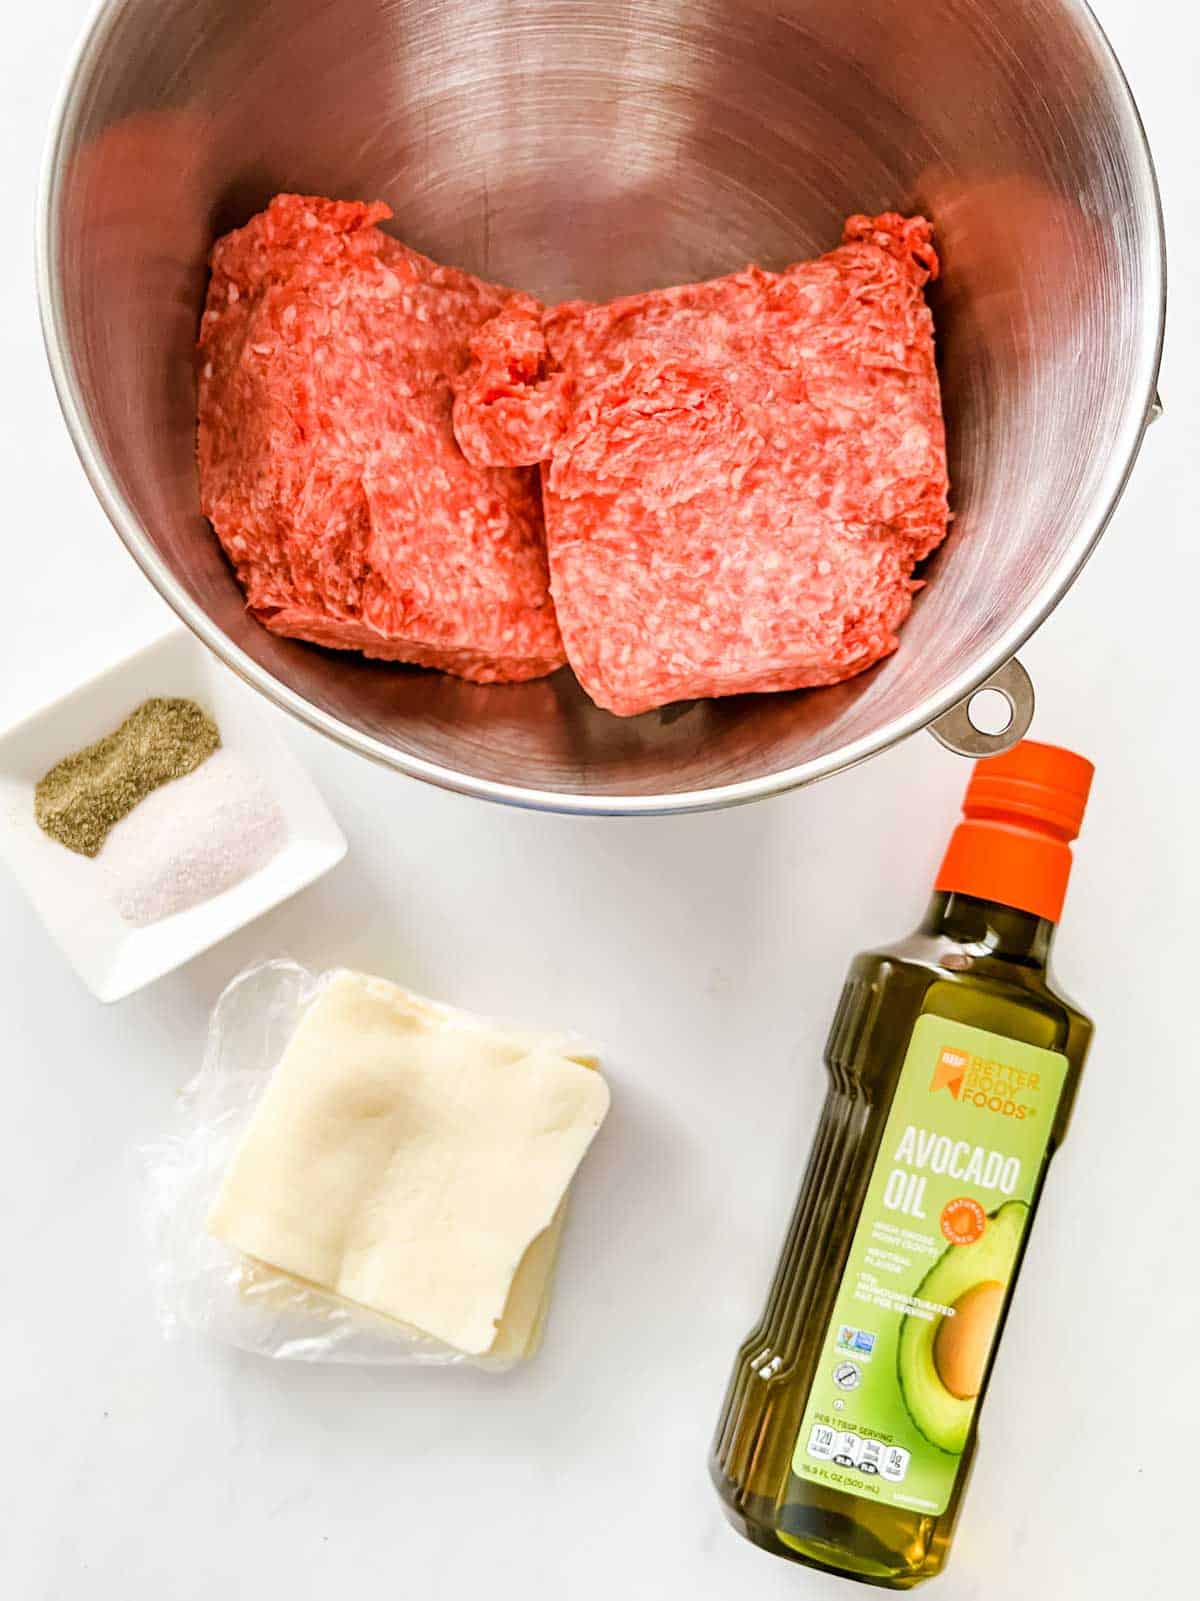 Overhead photo of a bowl of ground beef, seasonings, sliced cheese, and avocado oil.